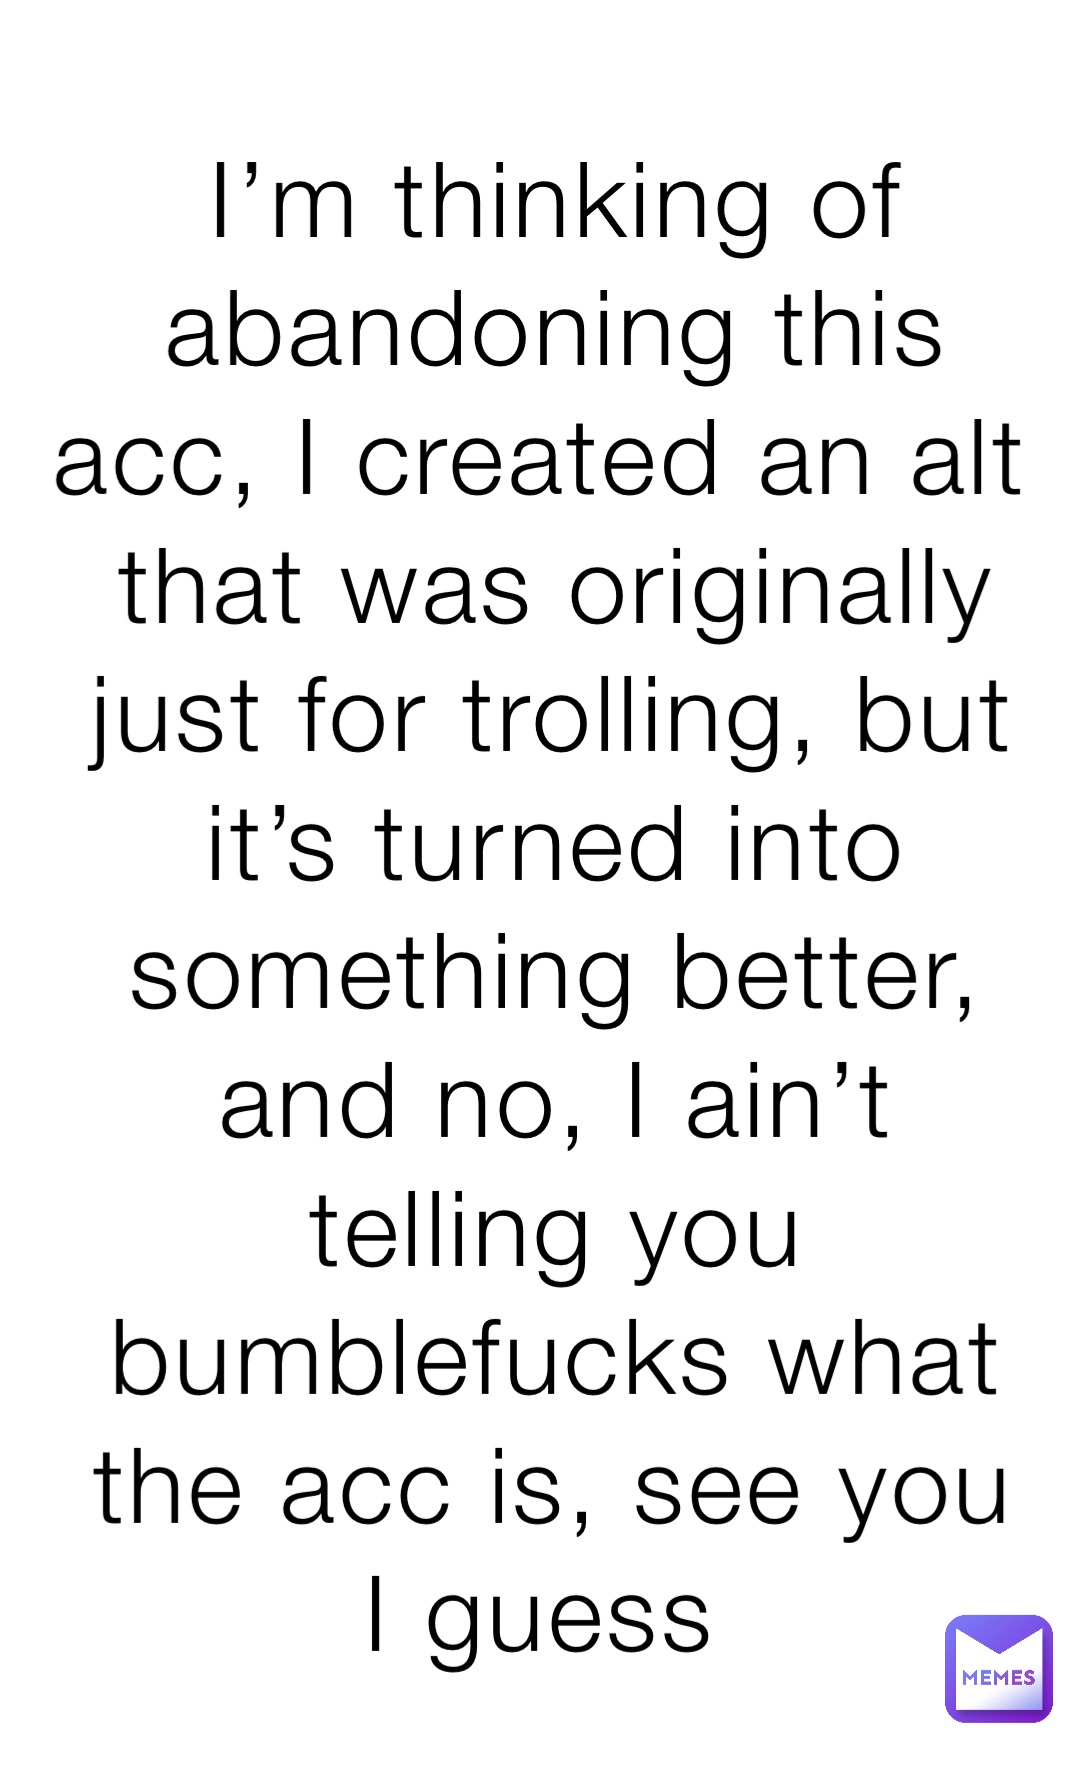 I’m thinking of abandoning this acc, I created an alt that was originally just for trolling, but it’s turned into something better, and no, I ain’t telling you bumblefucks what the acc is, see you I guess